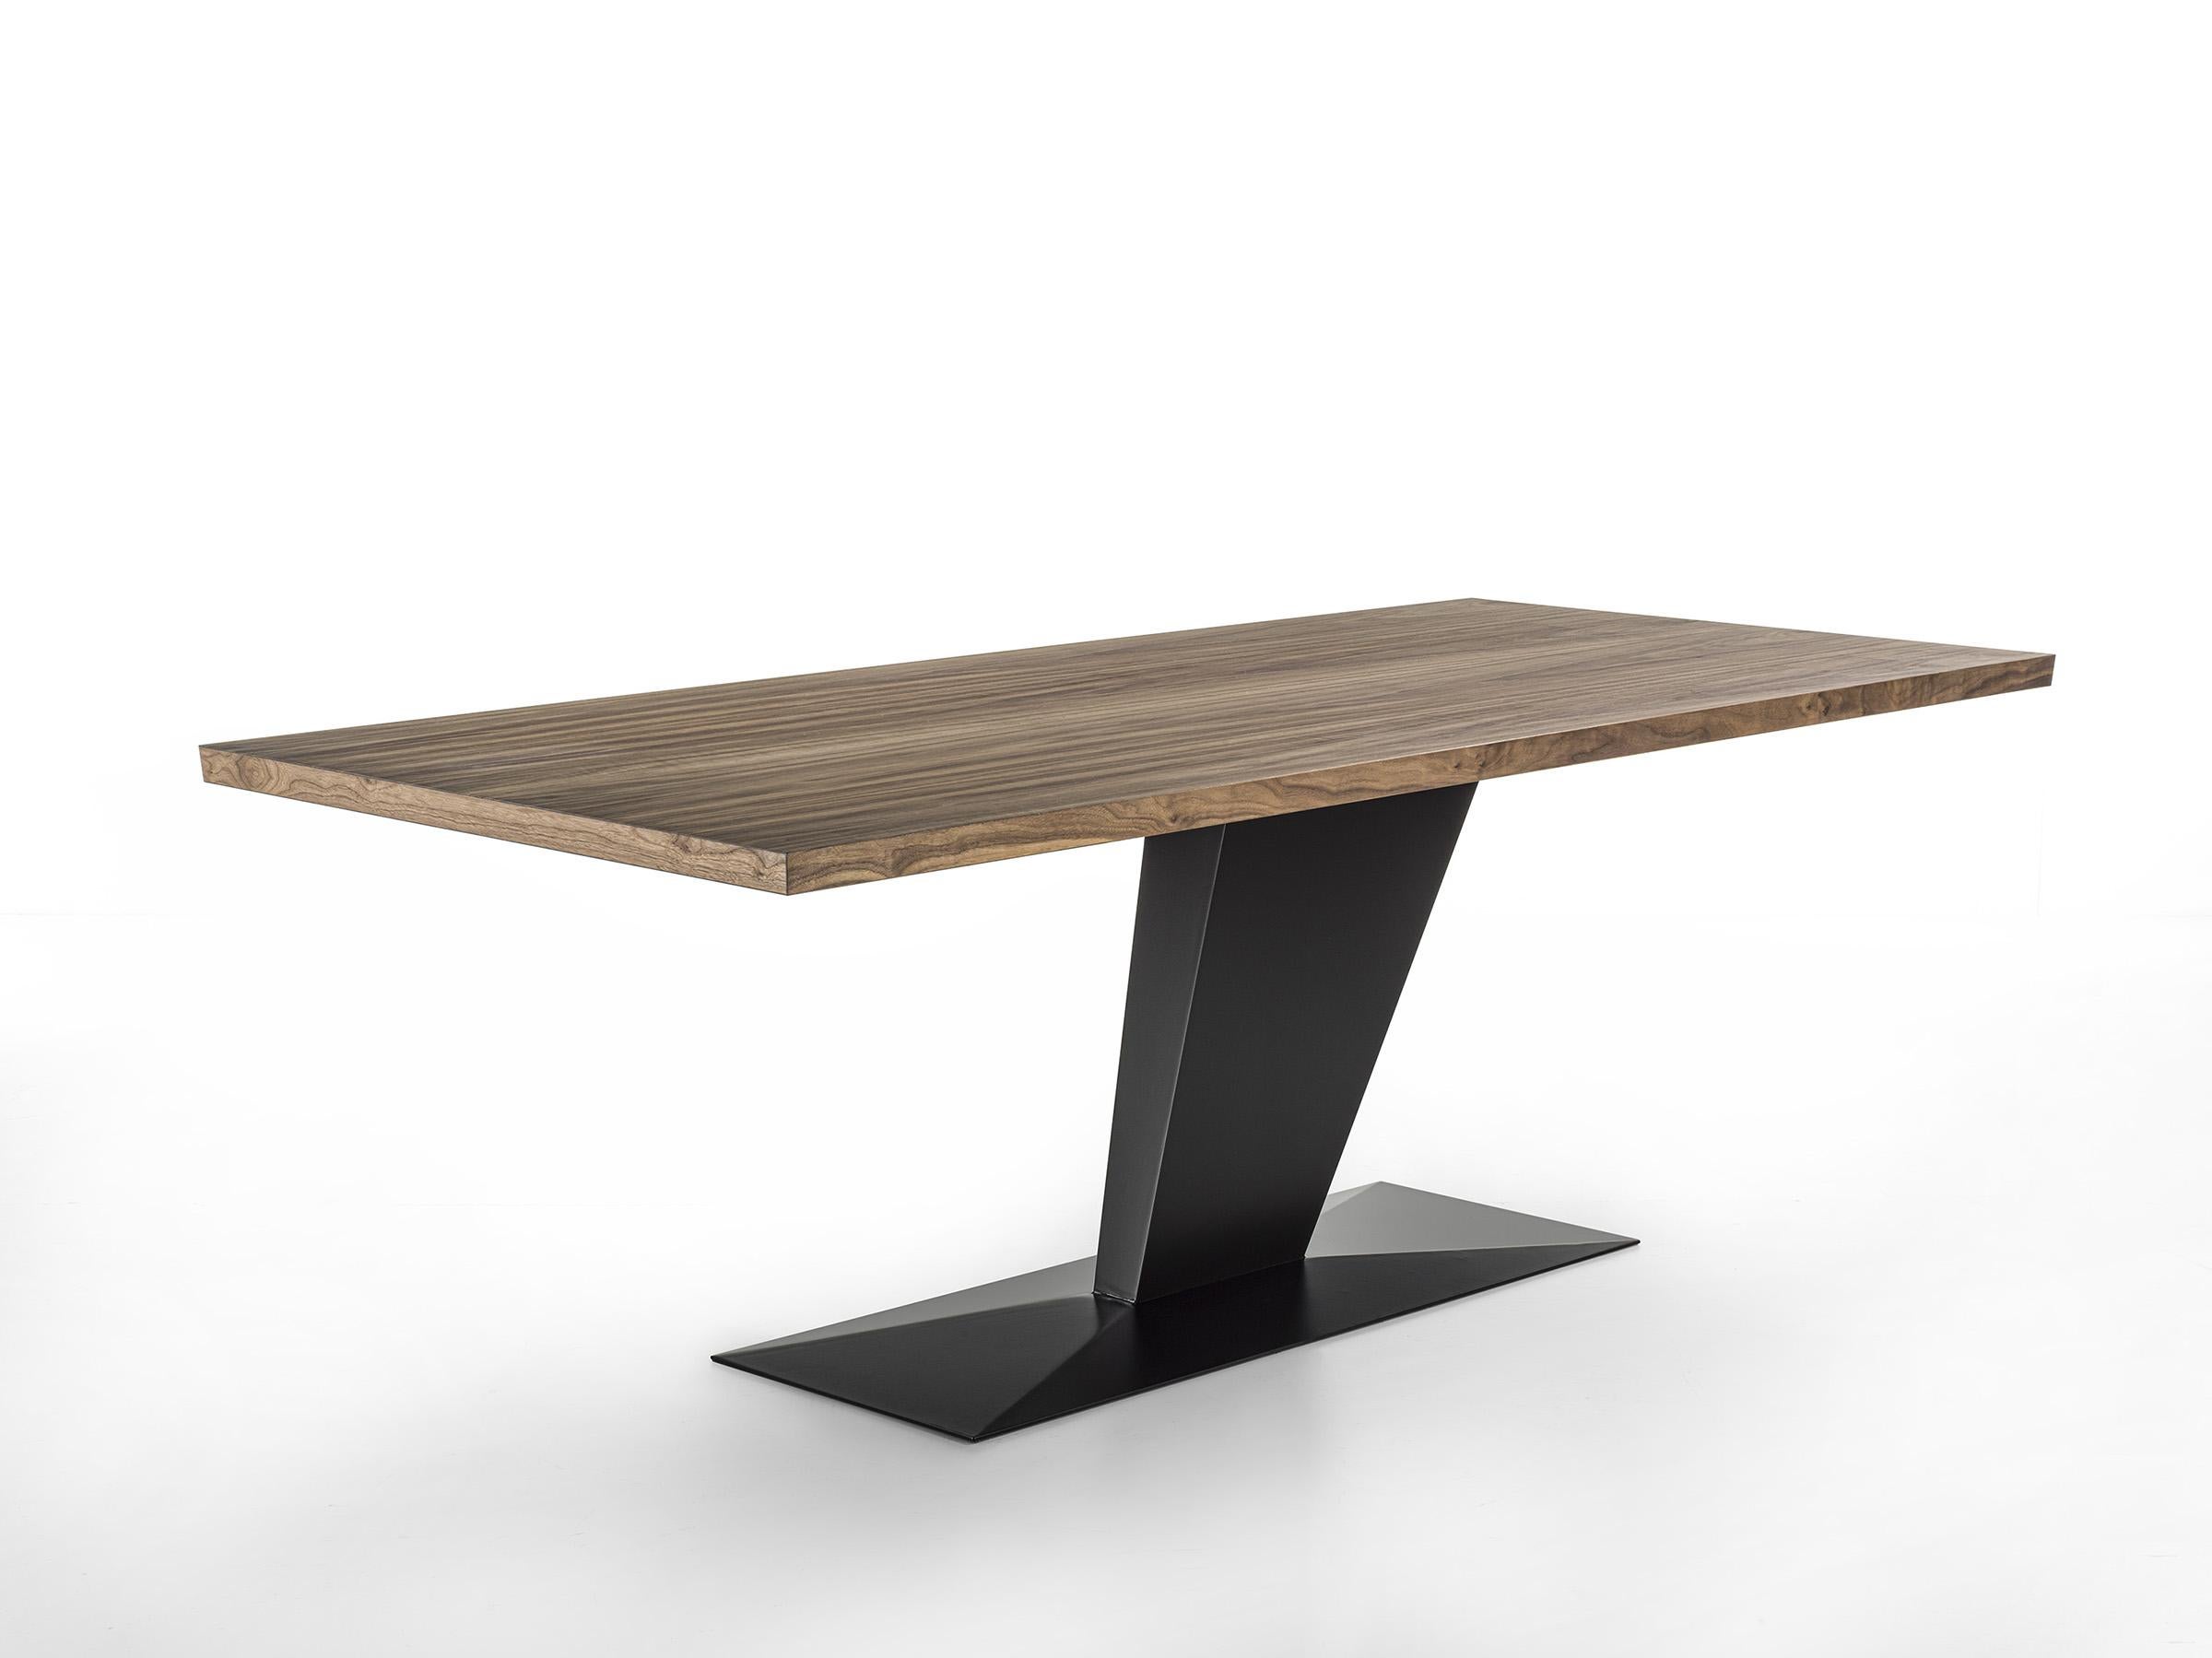 Table with blockboard veneered top and bevelled edges, combined with an iron base consisting of an asymmetrical, slanted leg positioned laterally, and a floor plate. 

Designed by Studio Excalibur and made in Italy. 

Variations:
- Wood